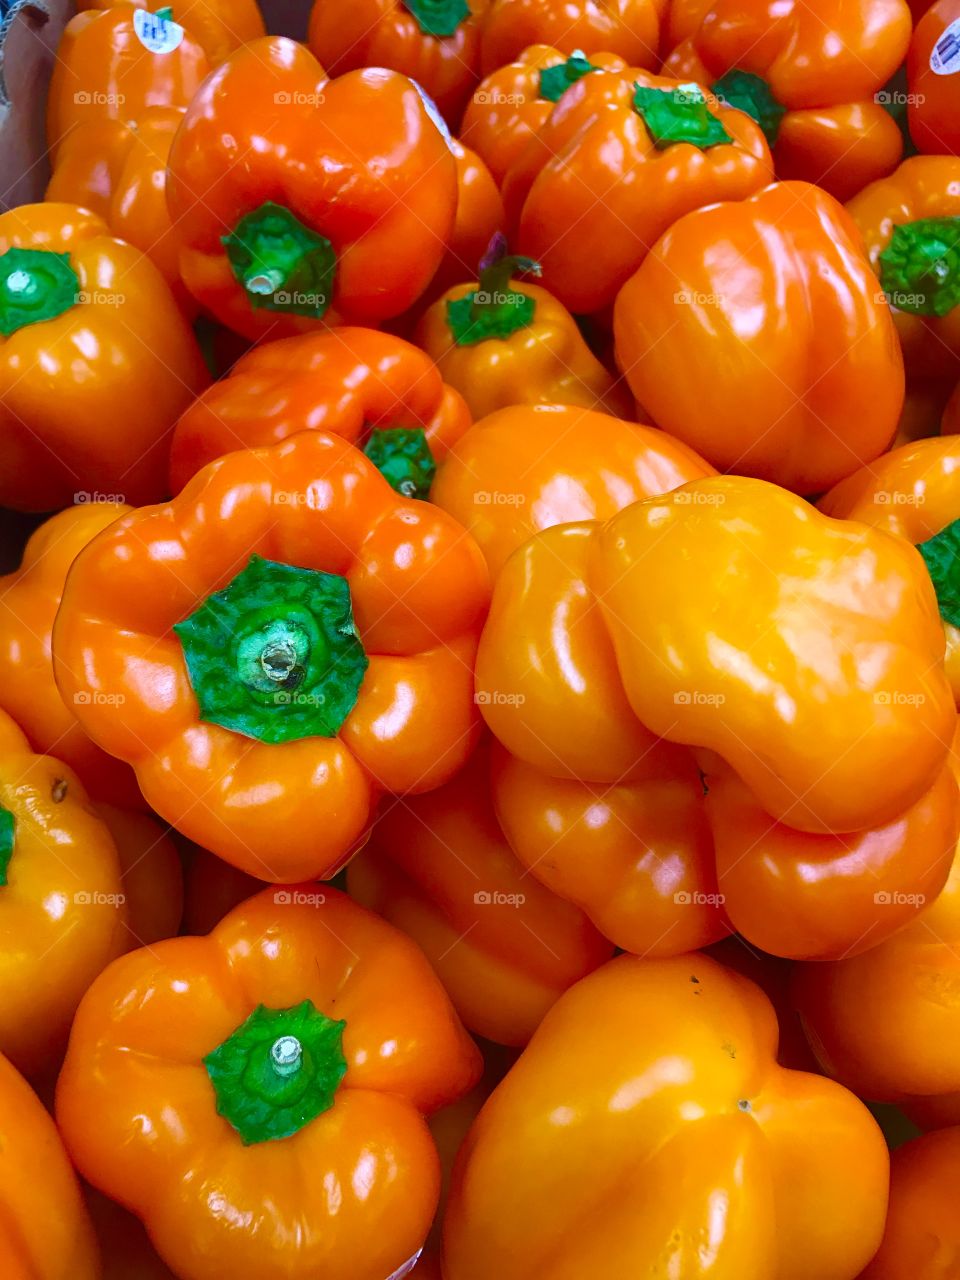 Orange and yellow bell peppers 